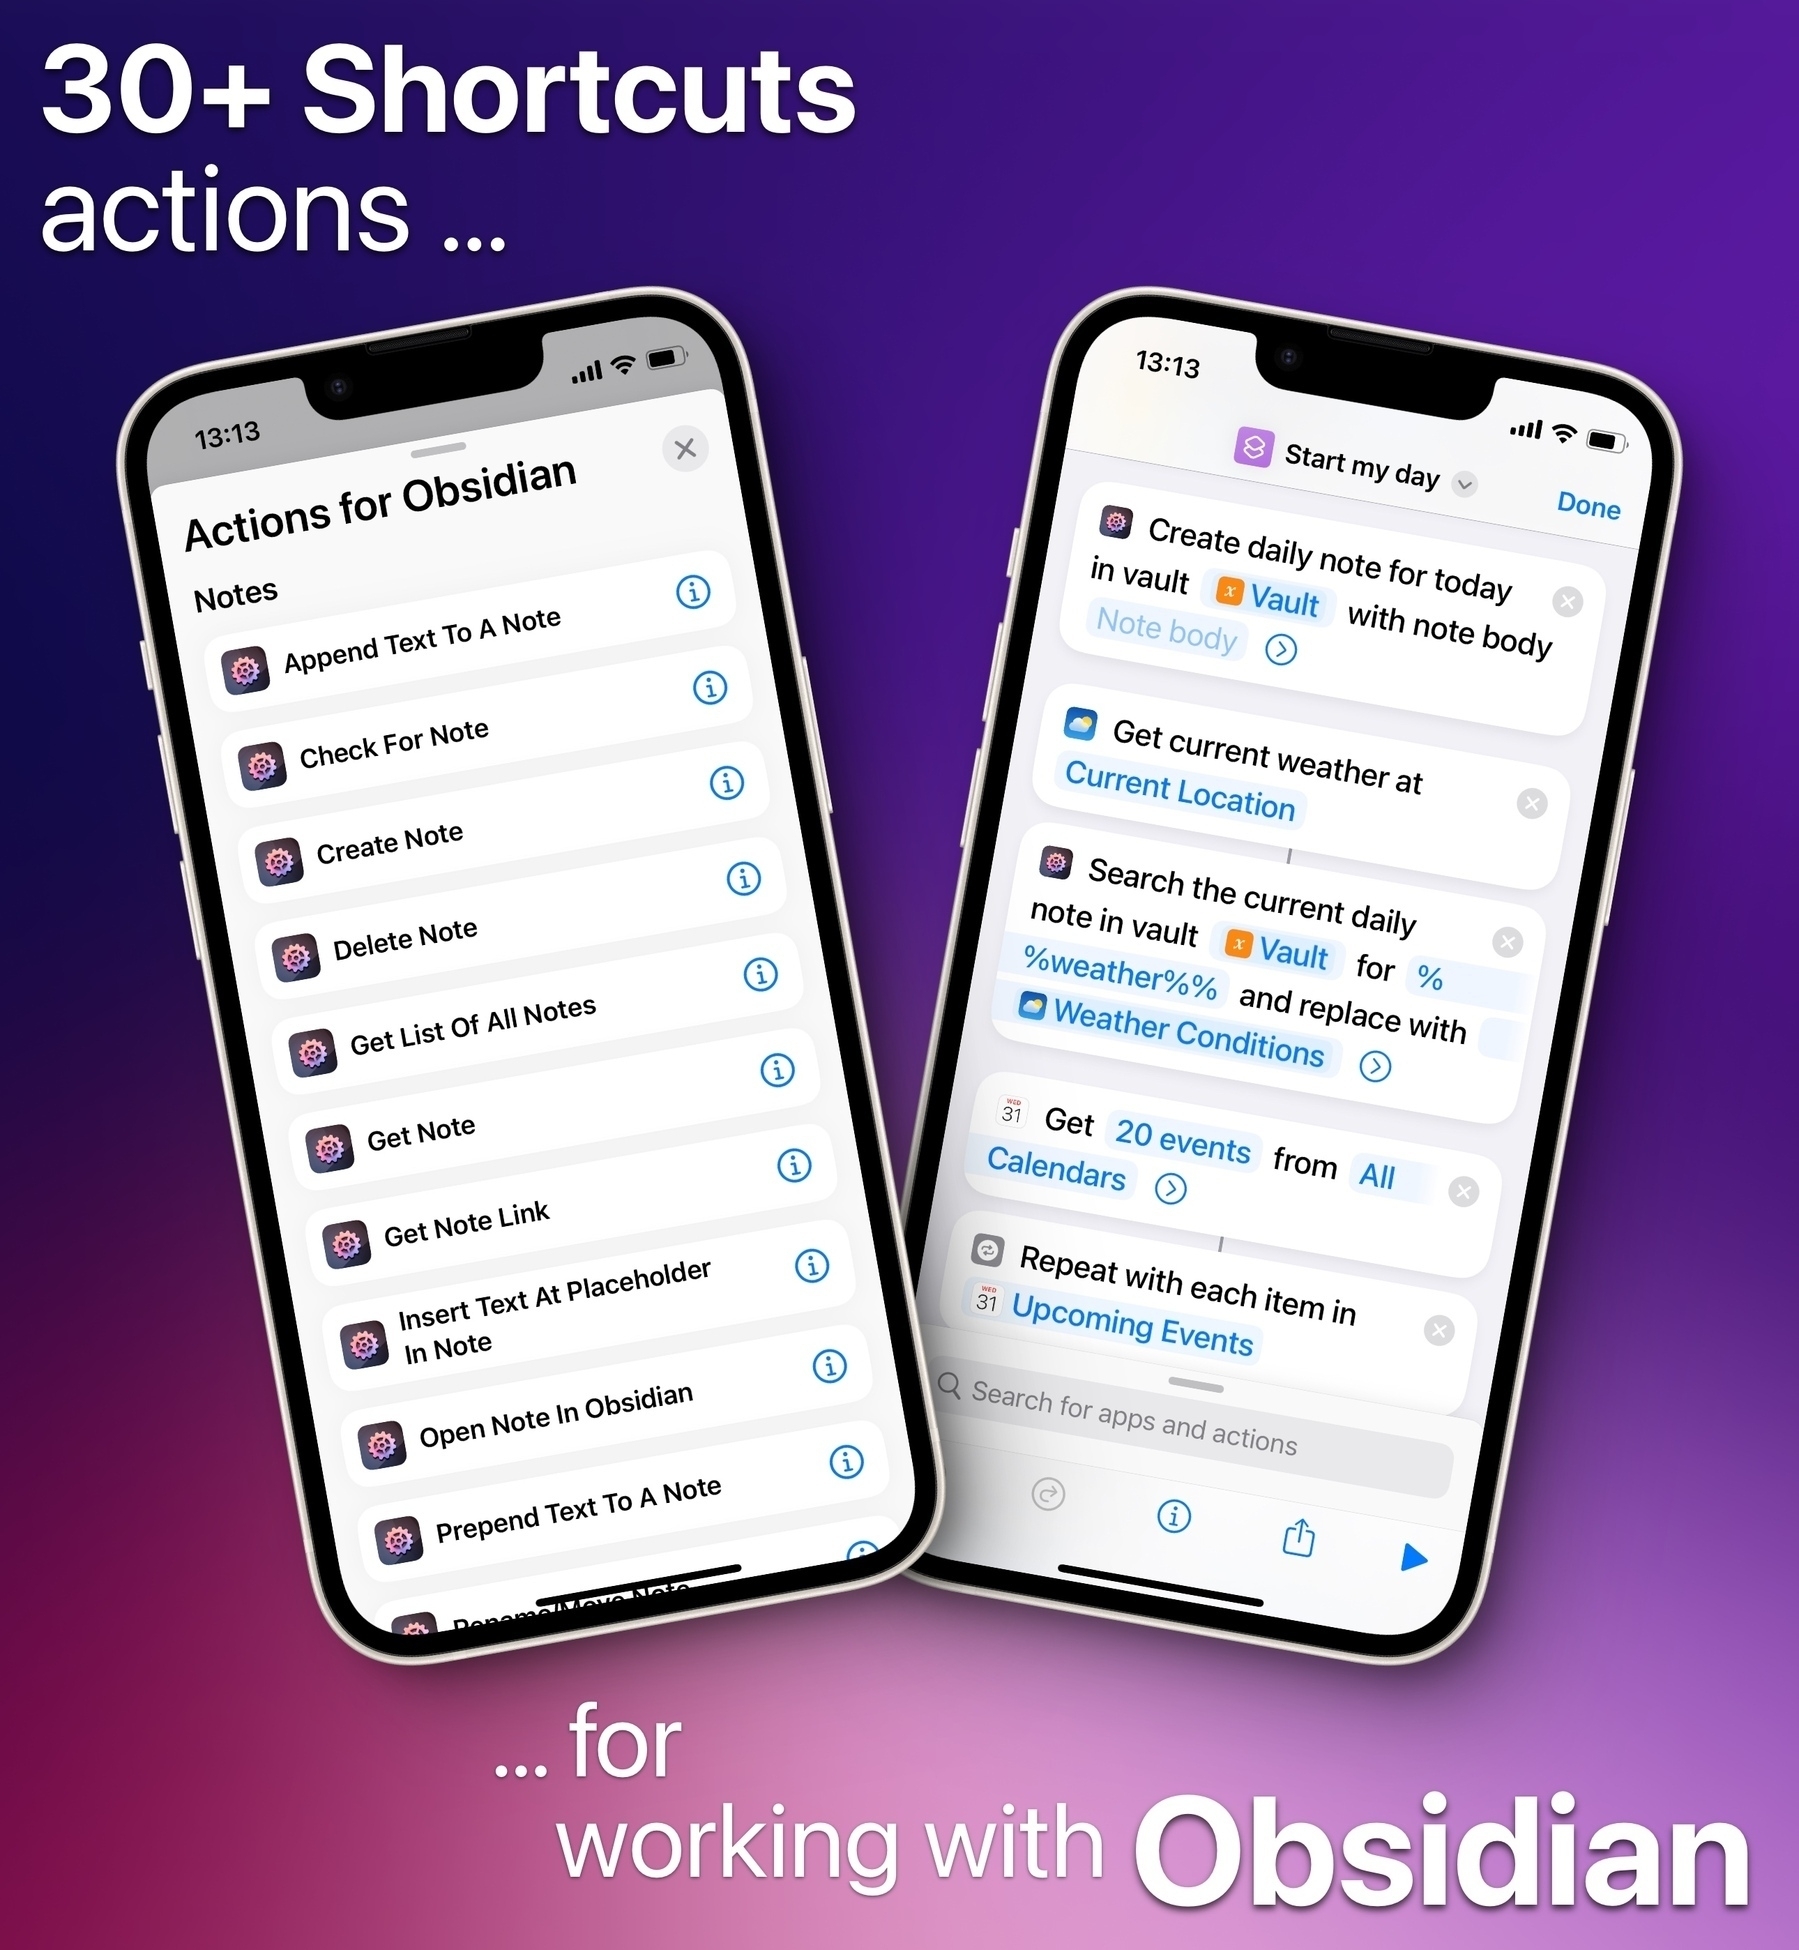 Two iPhone side by side, showing several Shortcuts actions